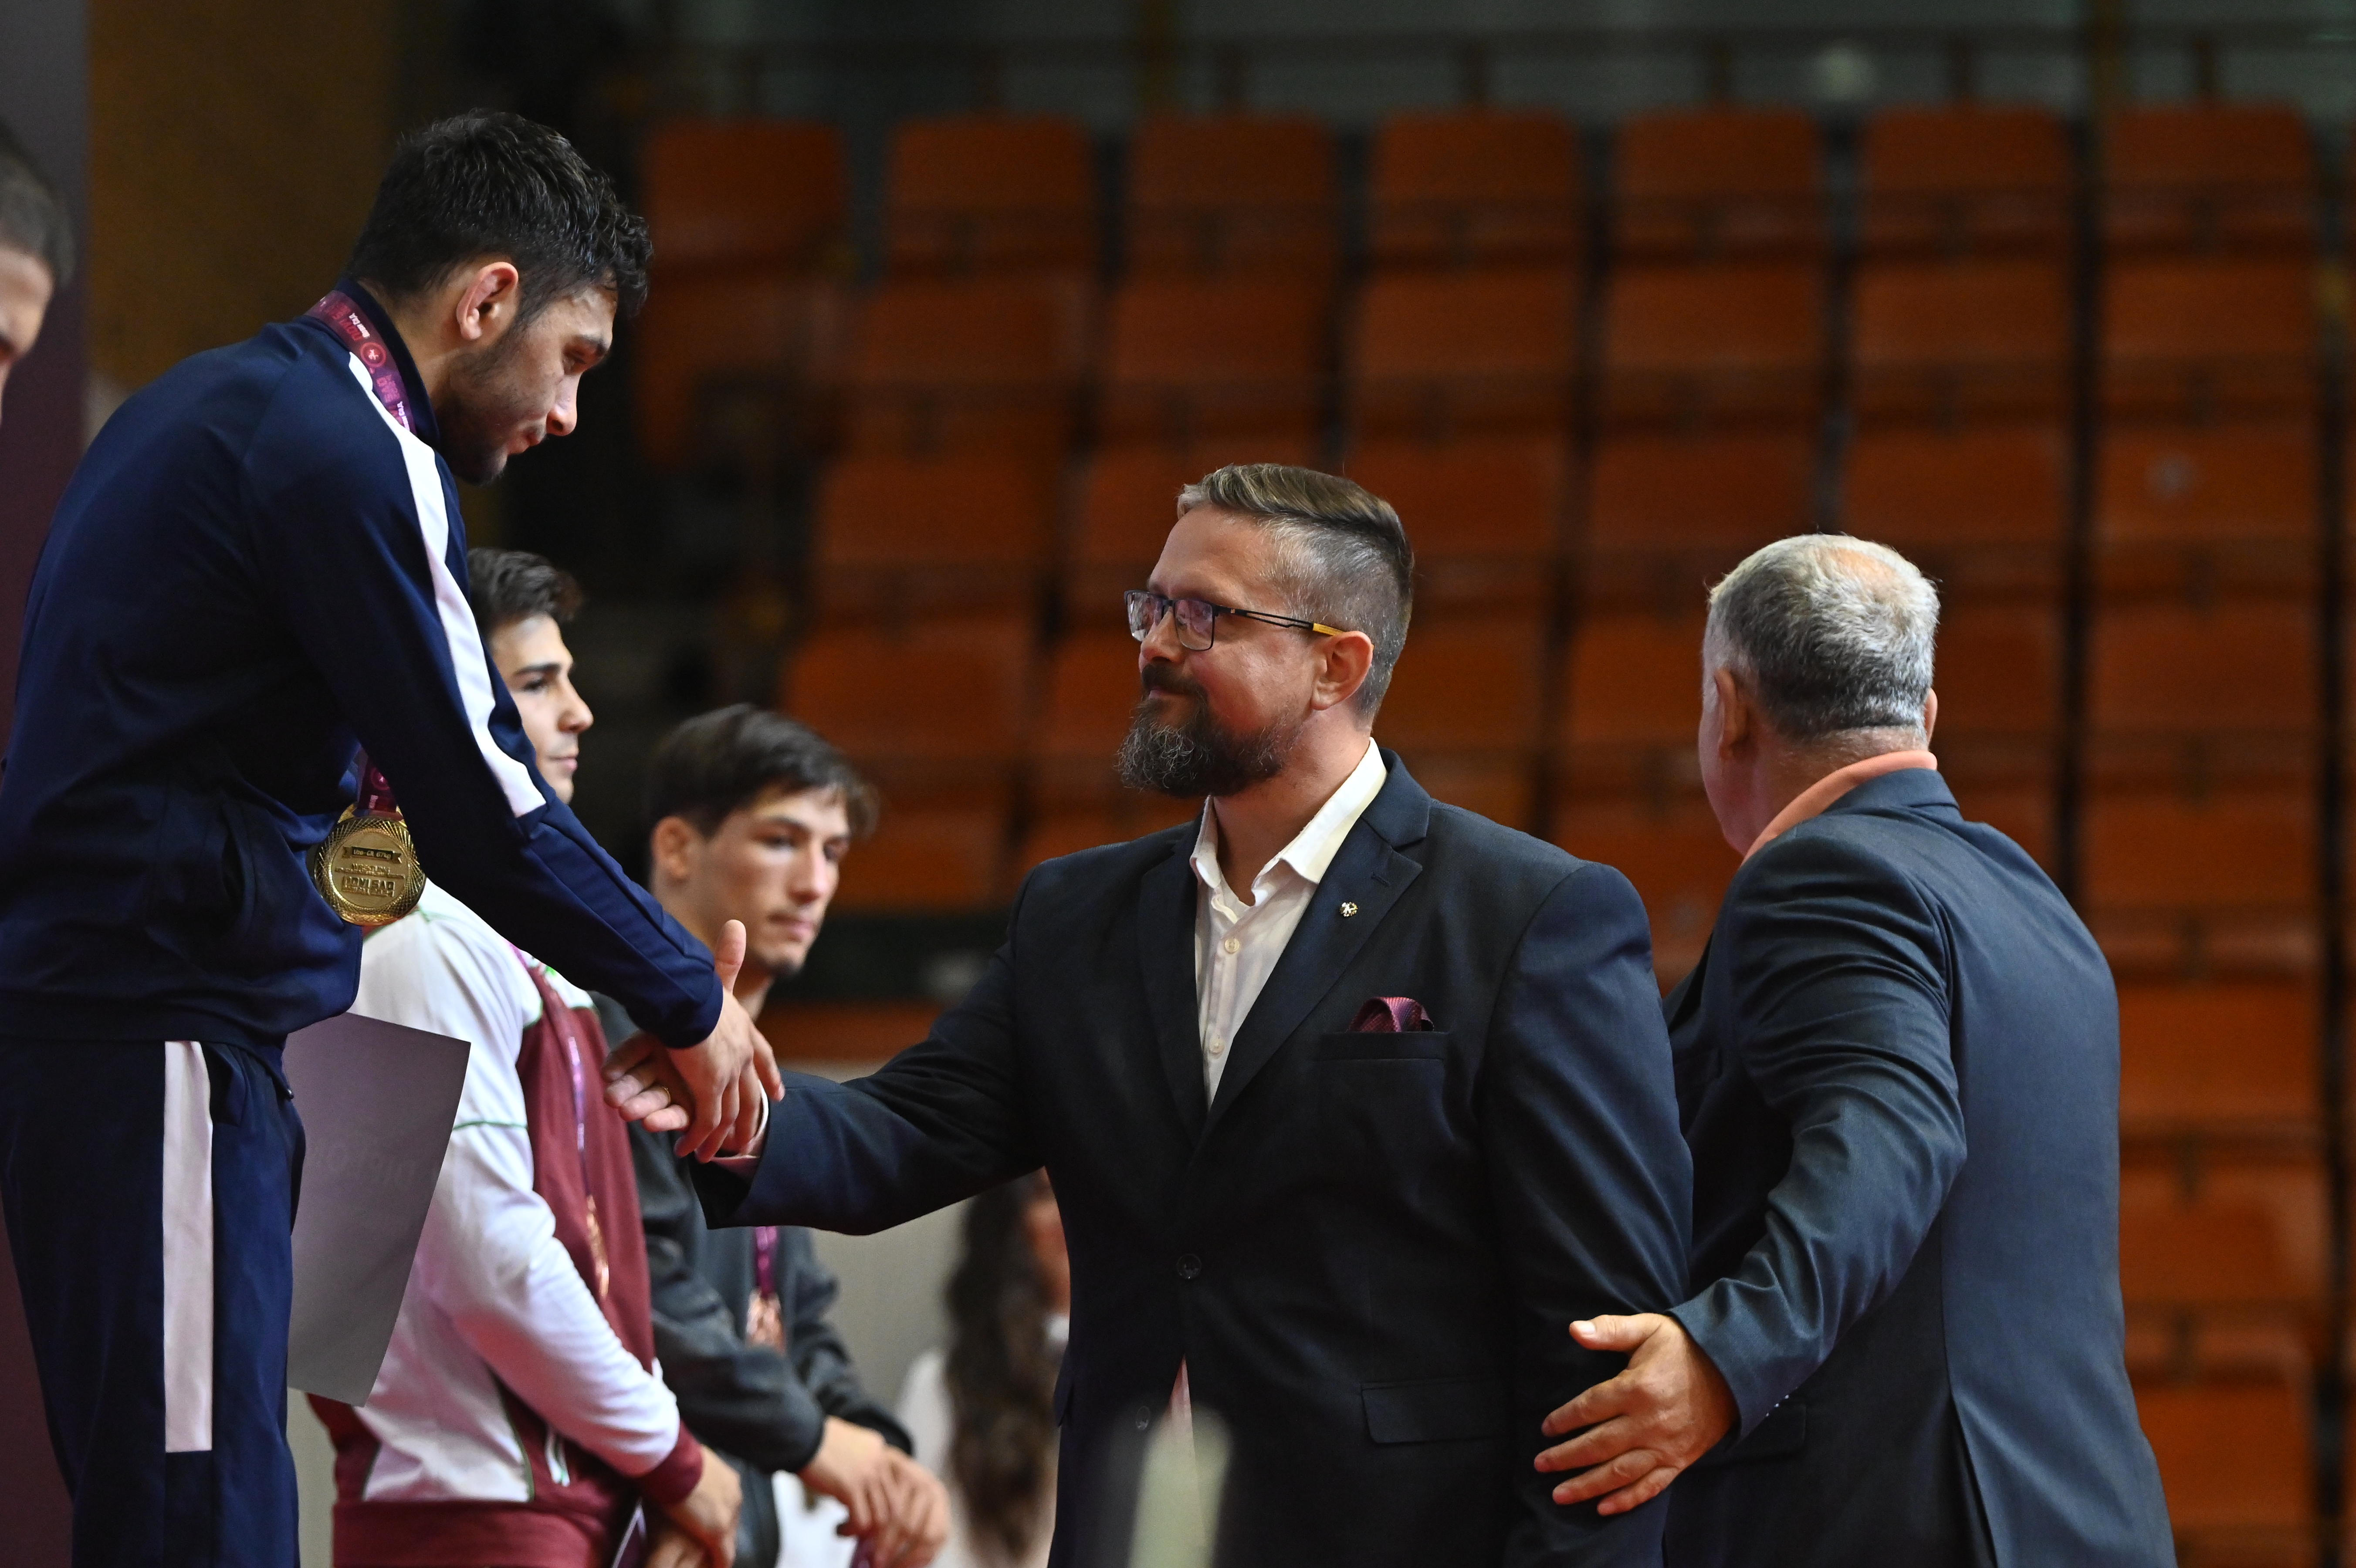 President Juhász awarded medals to the cadets and juniors at the European Wrestling Championship 